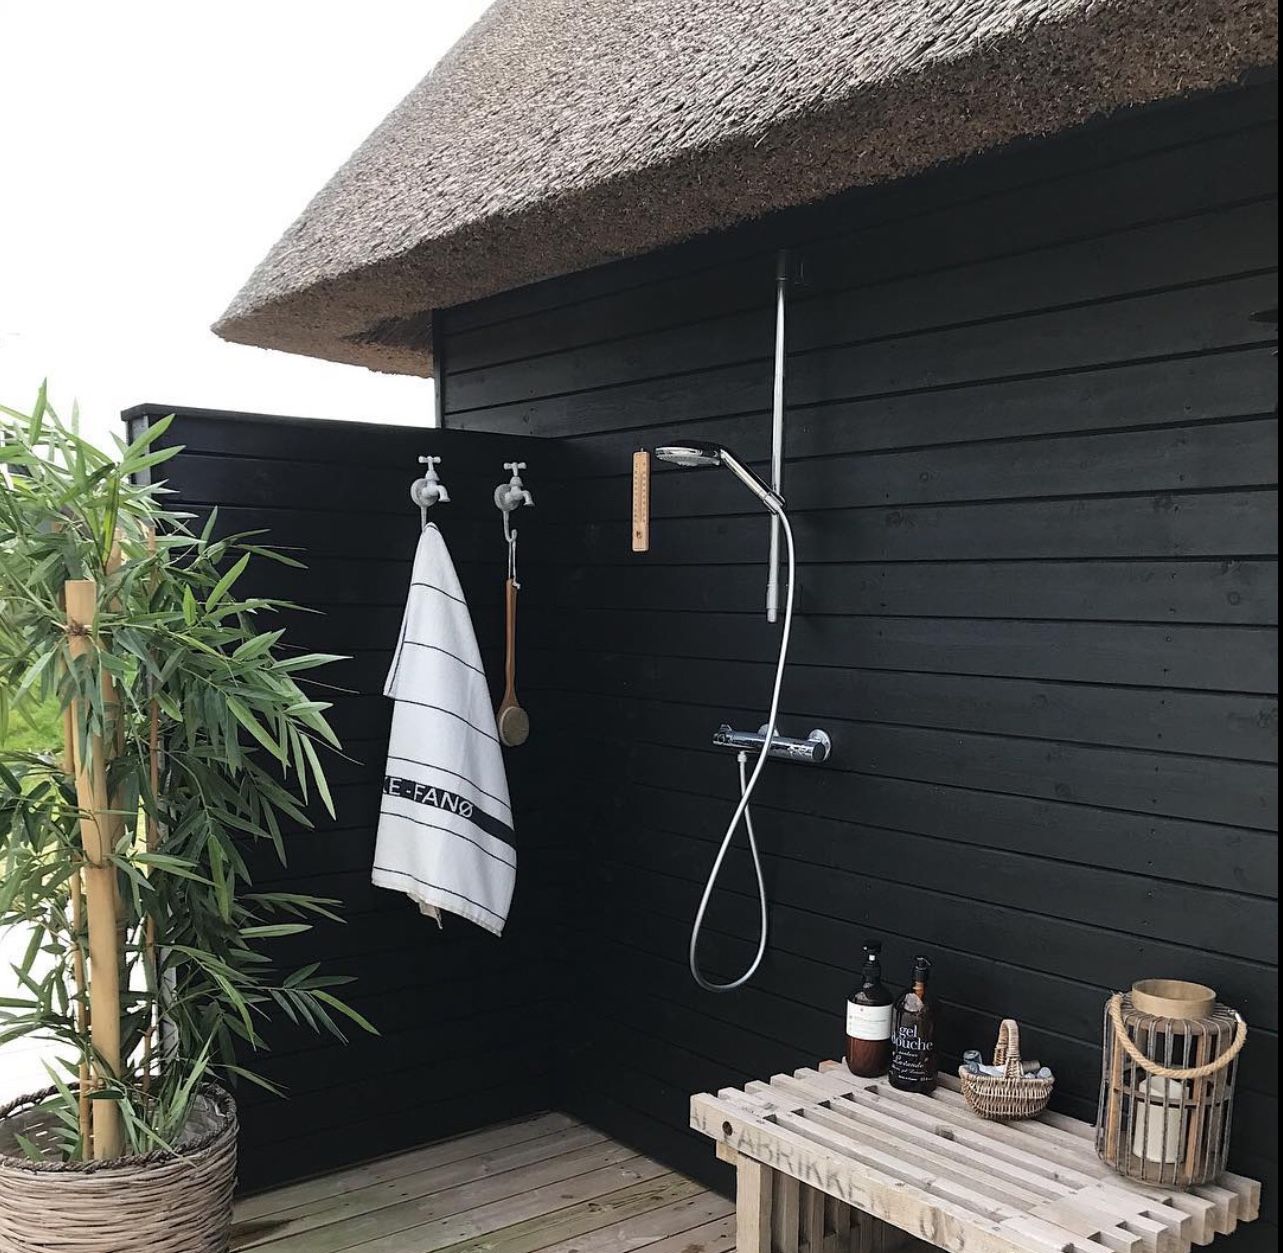 The thatched roof hints at a nearby beach, but this modern outdoor shower design stays simple and true to the function of the space. #backyard inspiration via www.L-2-Design.com